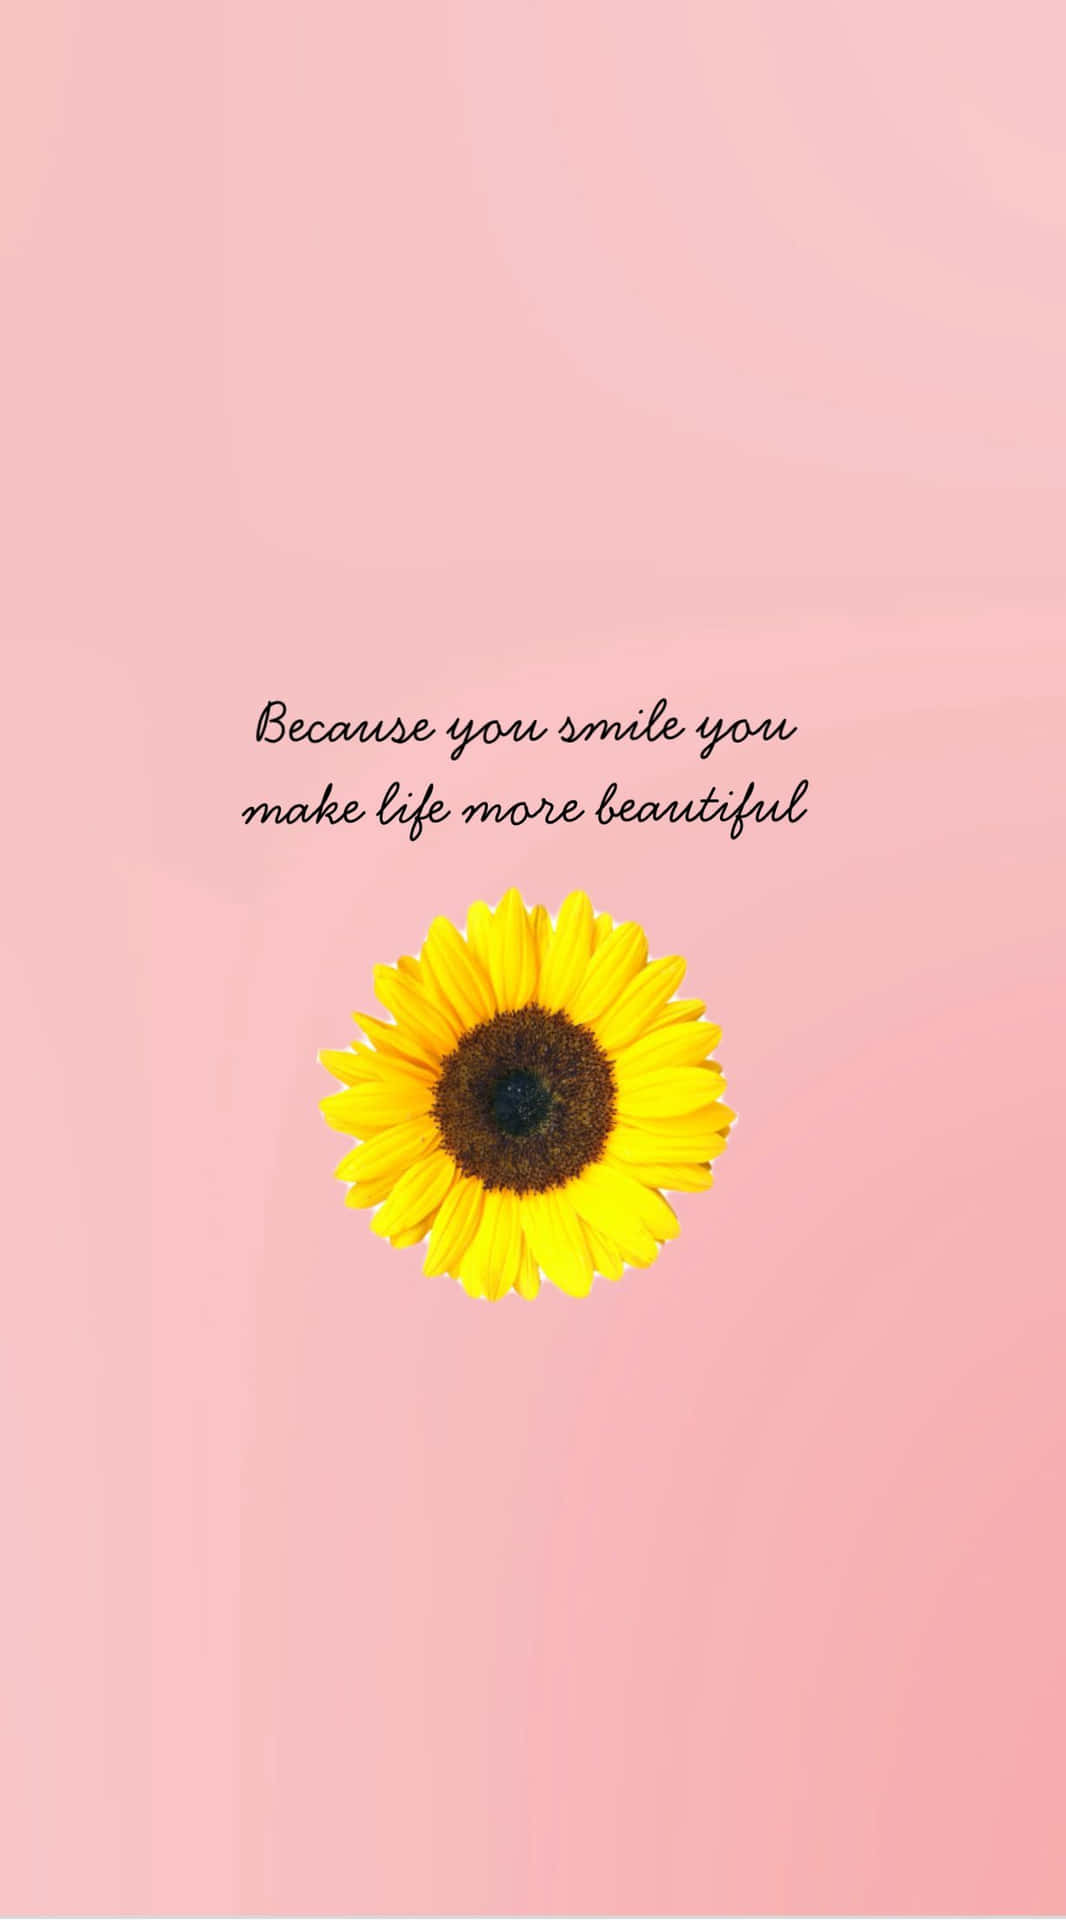 sunflower quotes and sayings